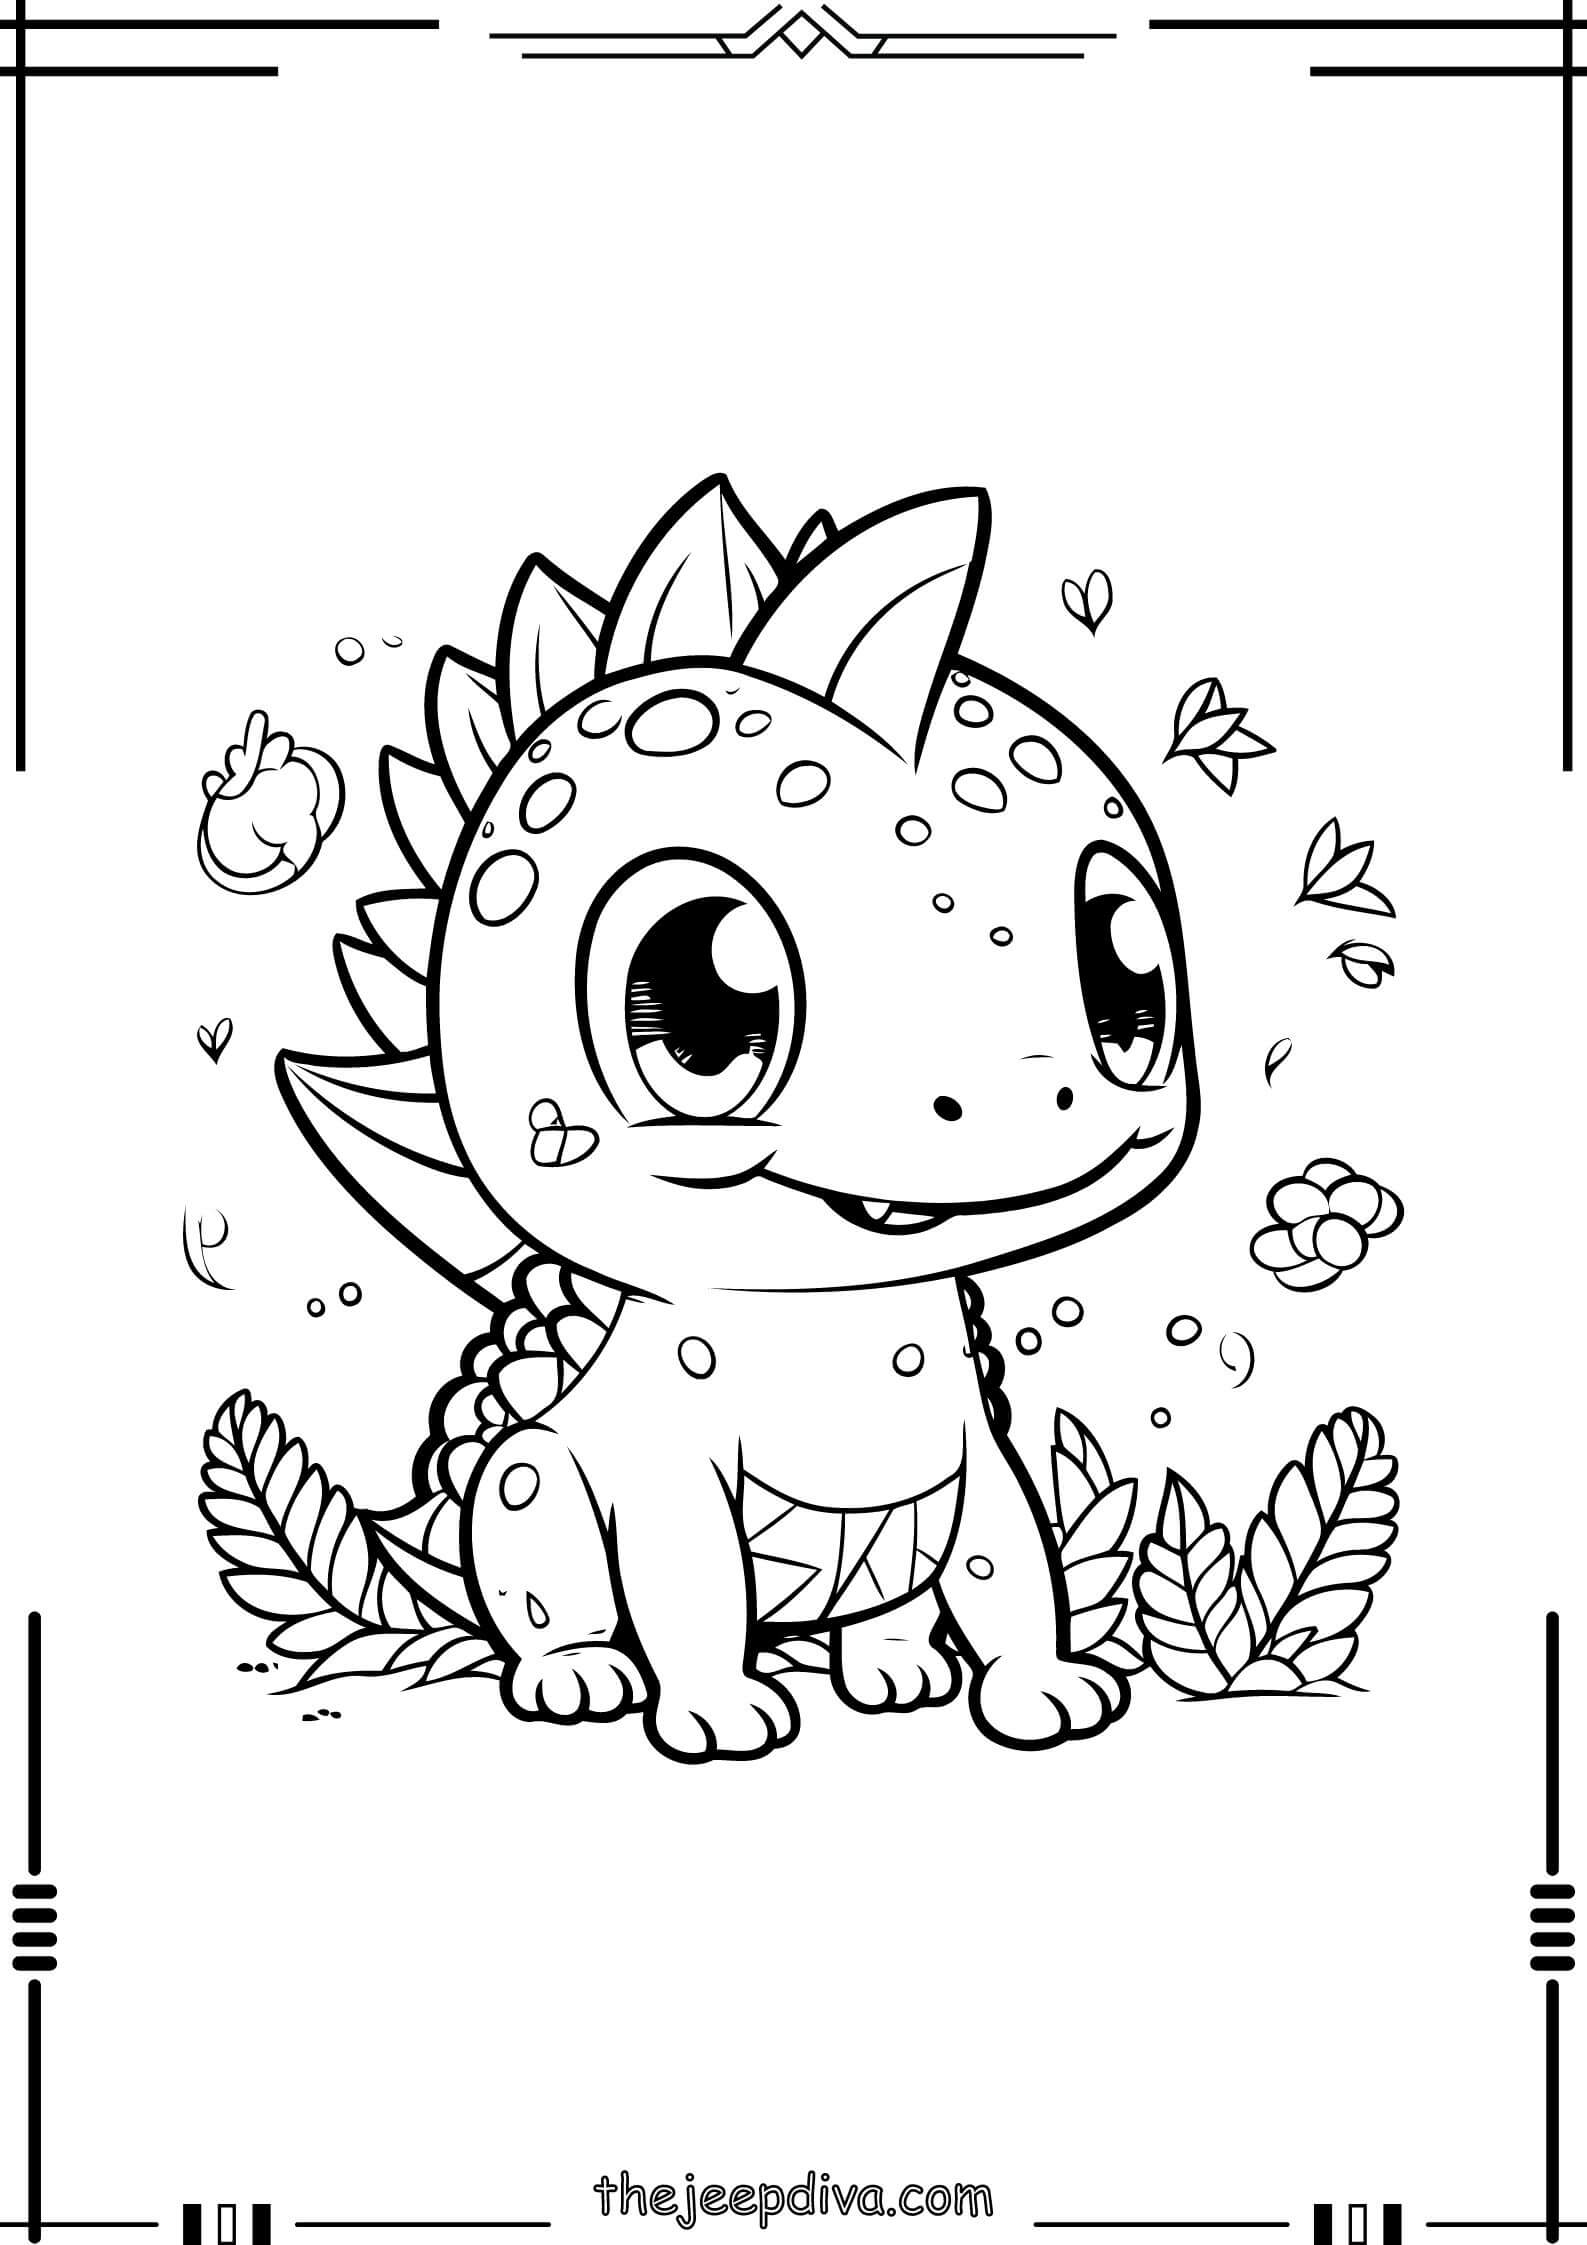 Dinosaur-Colouring-Pages-Easy-19